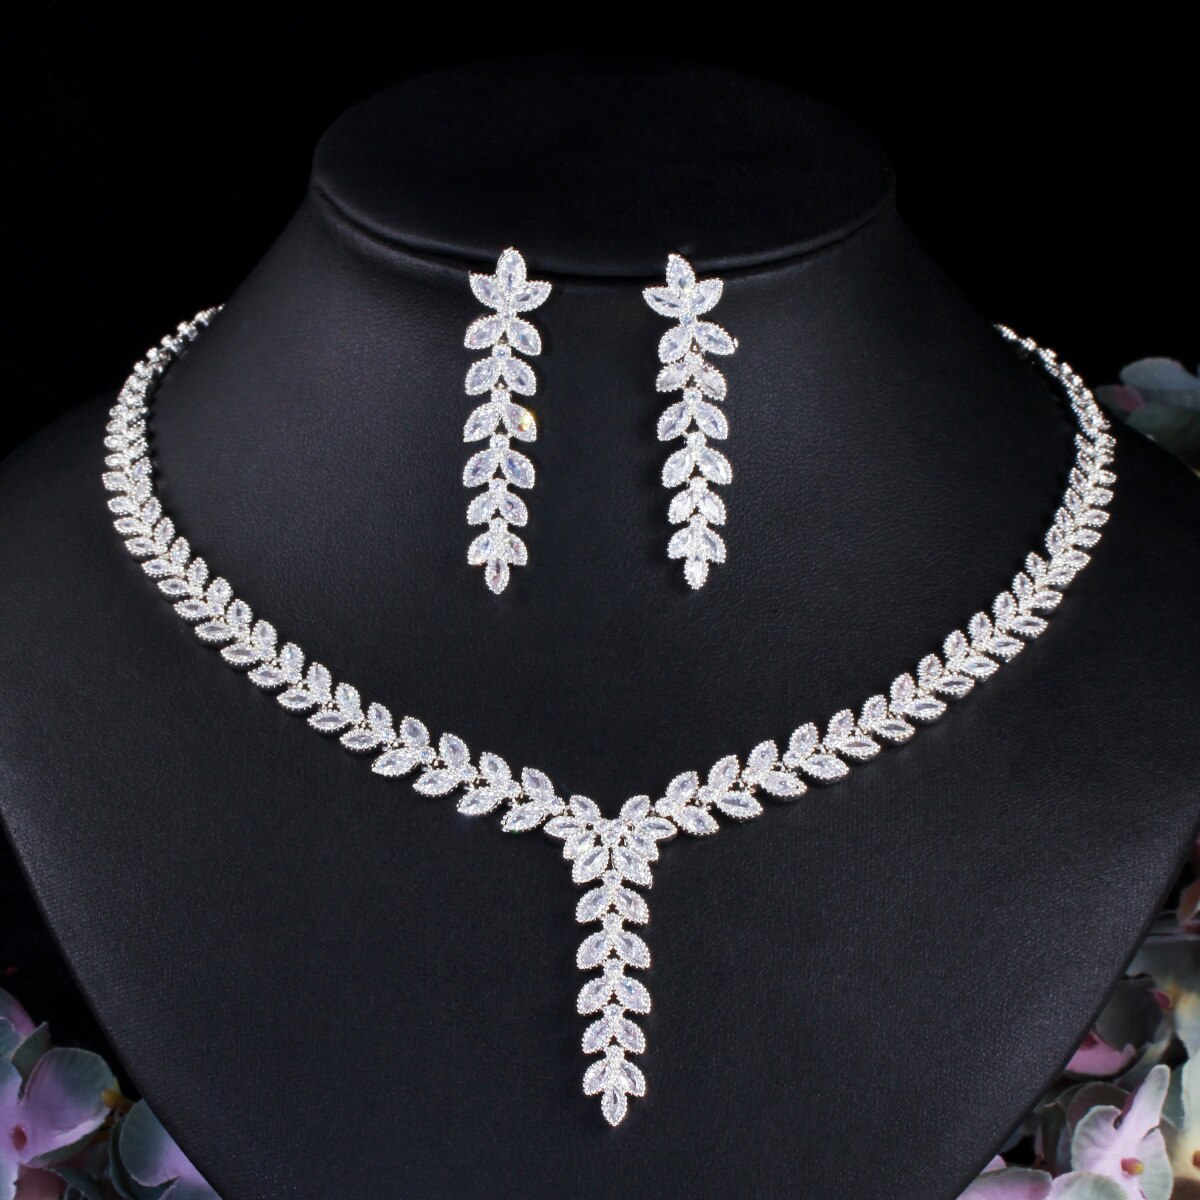 ThreeGraces-Elegant-Cubic-Zirconia-Silver-Color-Leaf-Shape-Earring-and-Necklace-Wedding-Jewelry-Sets-1005001632637038-10